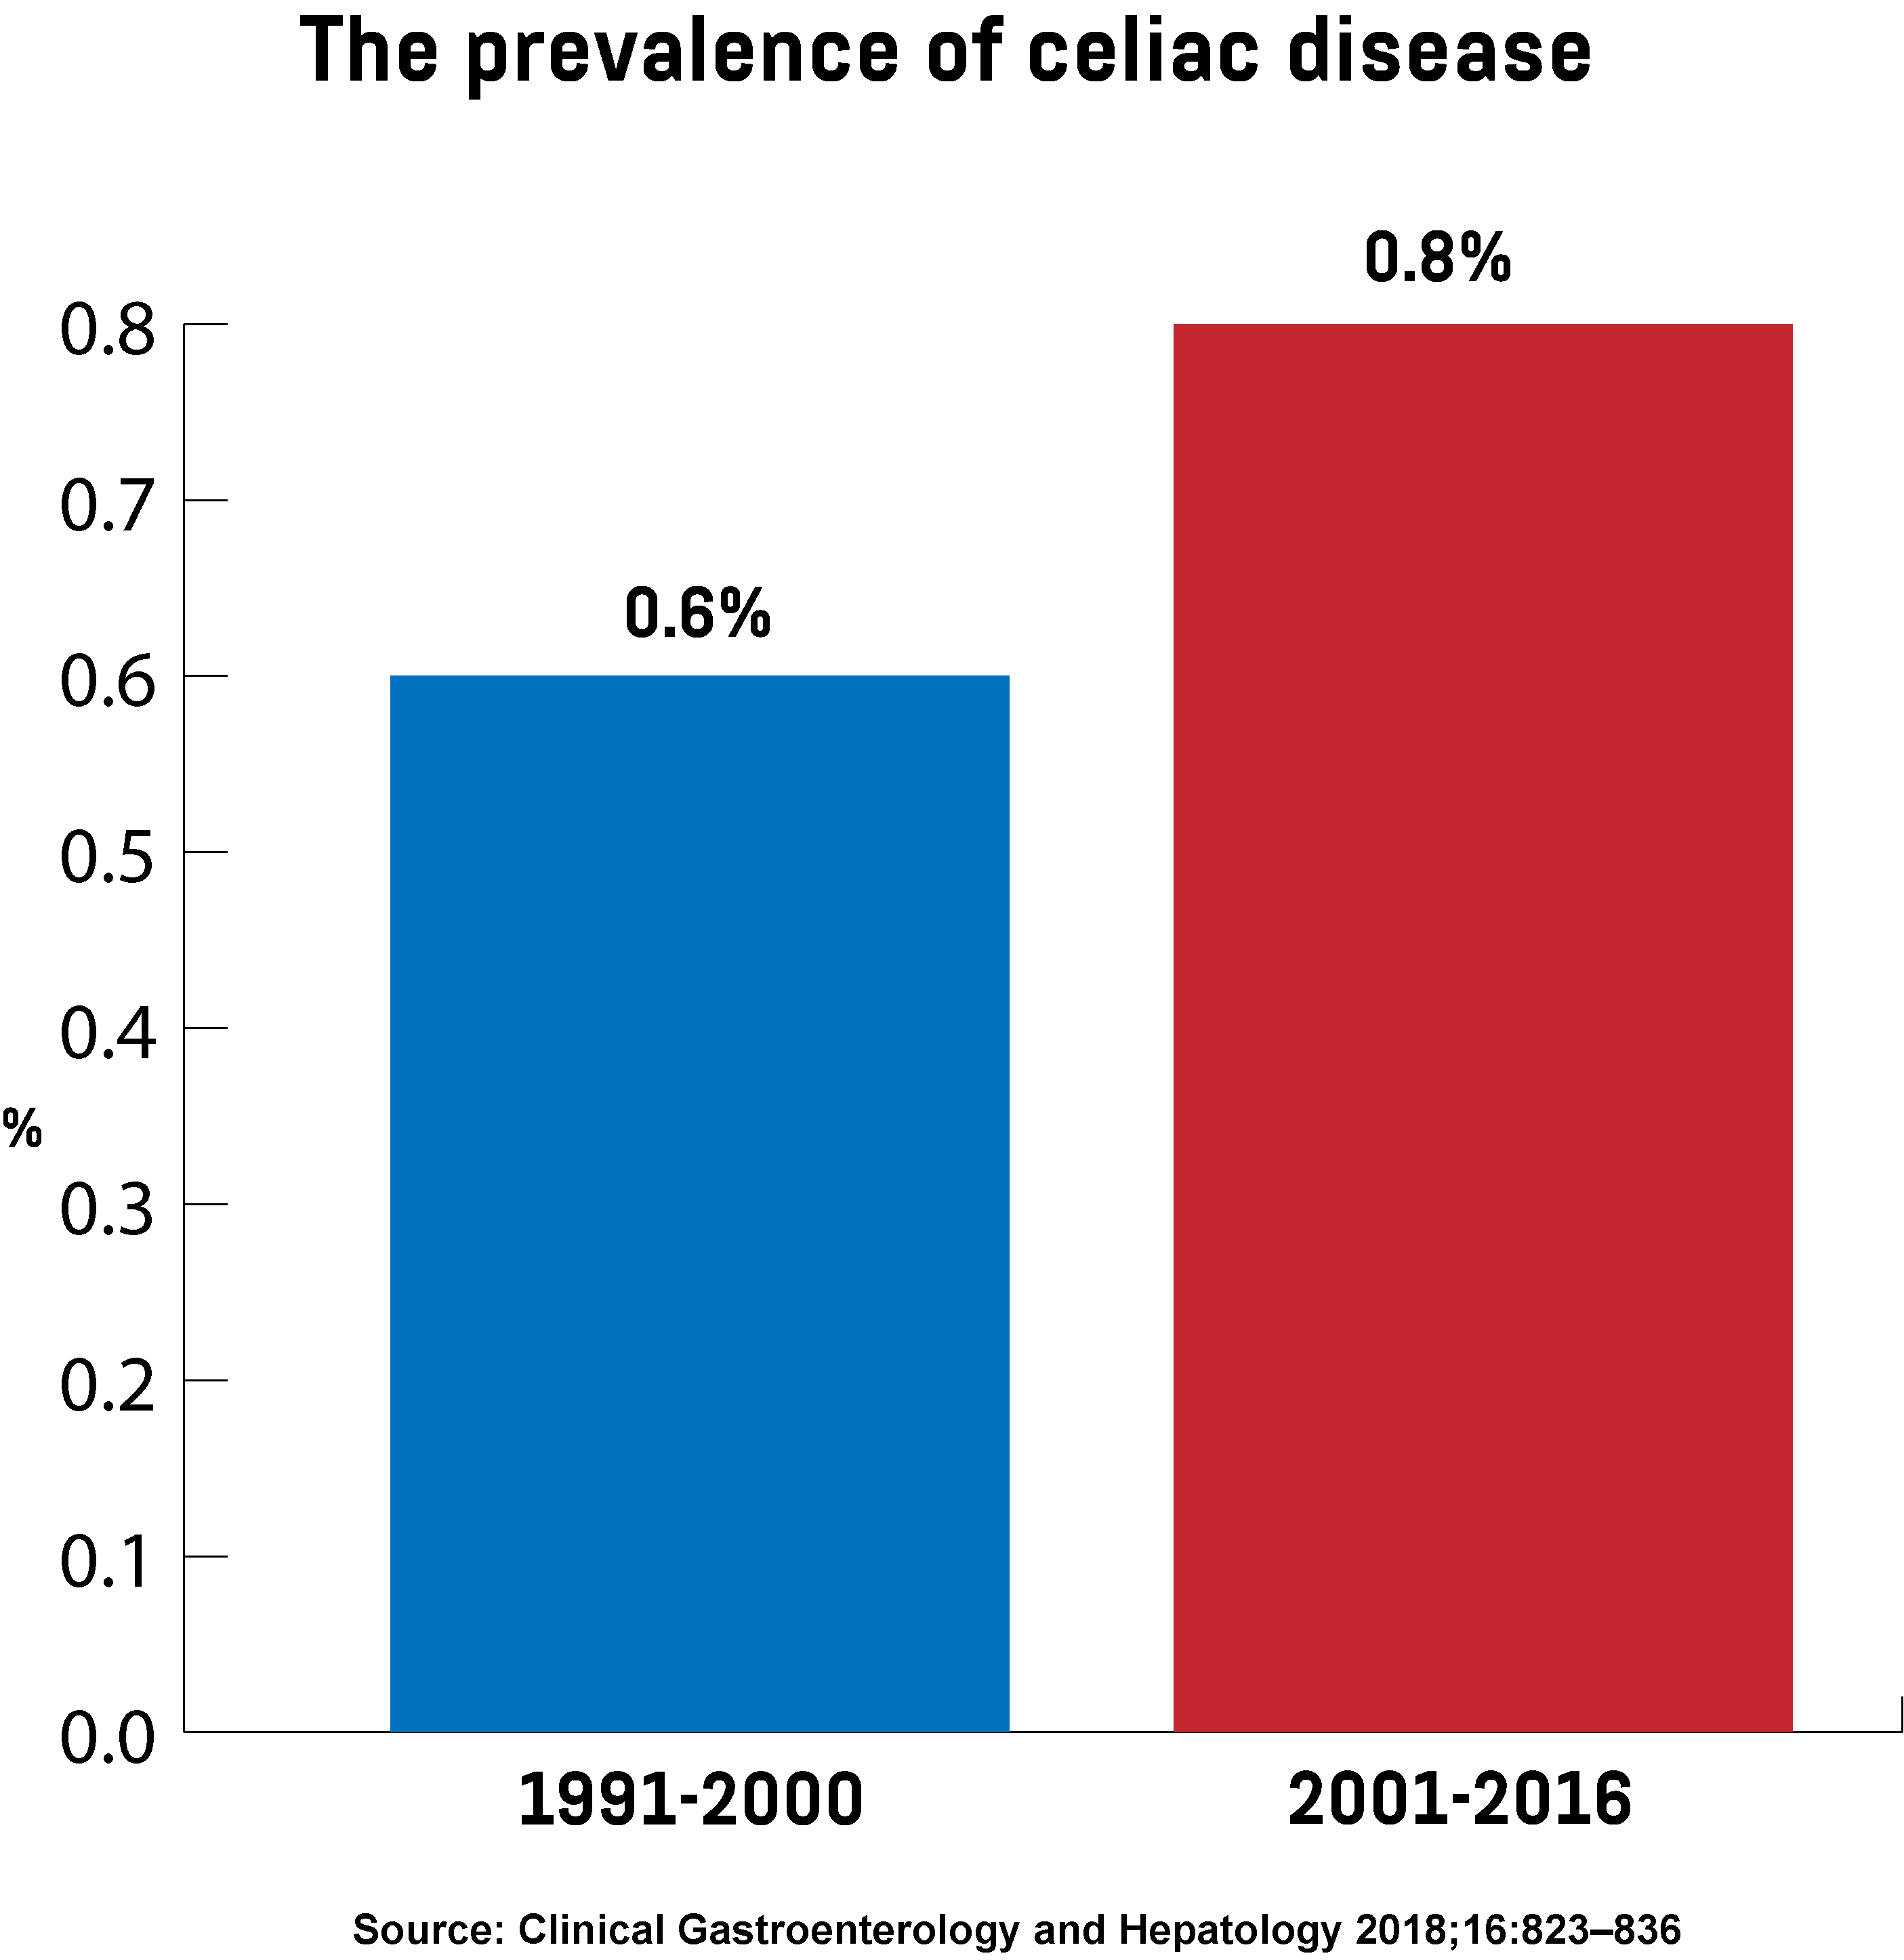 Graph showing the prevalence of celiac disease from 1991 to 2000, and from 2001 to 2016.